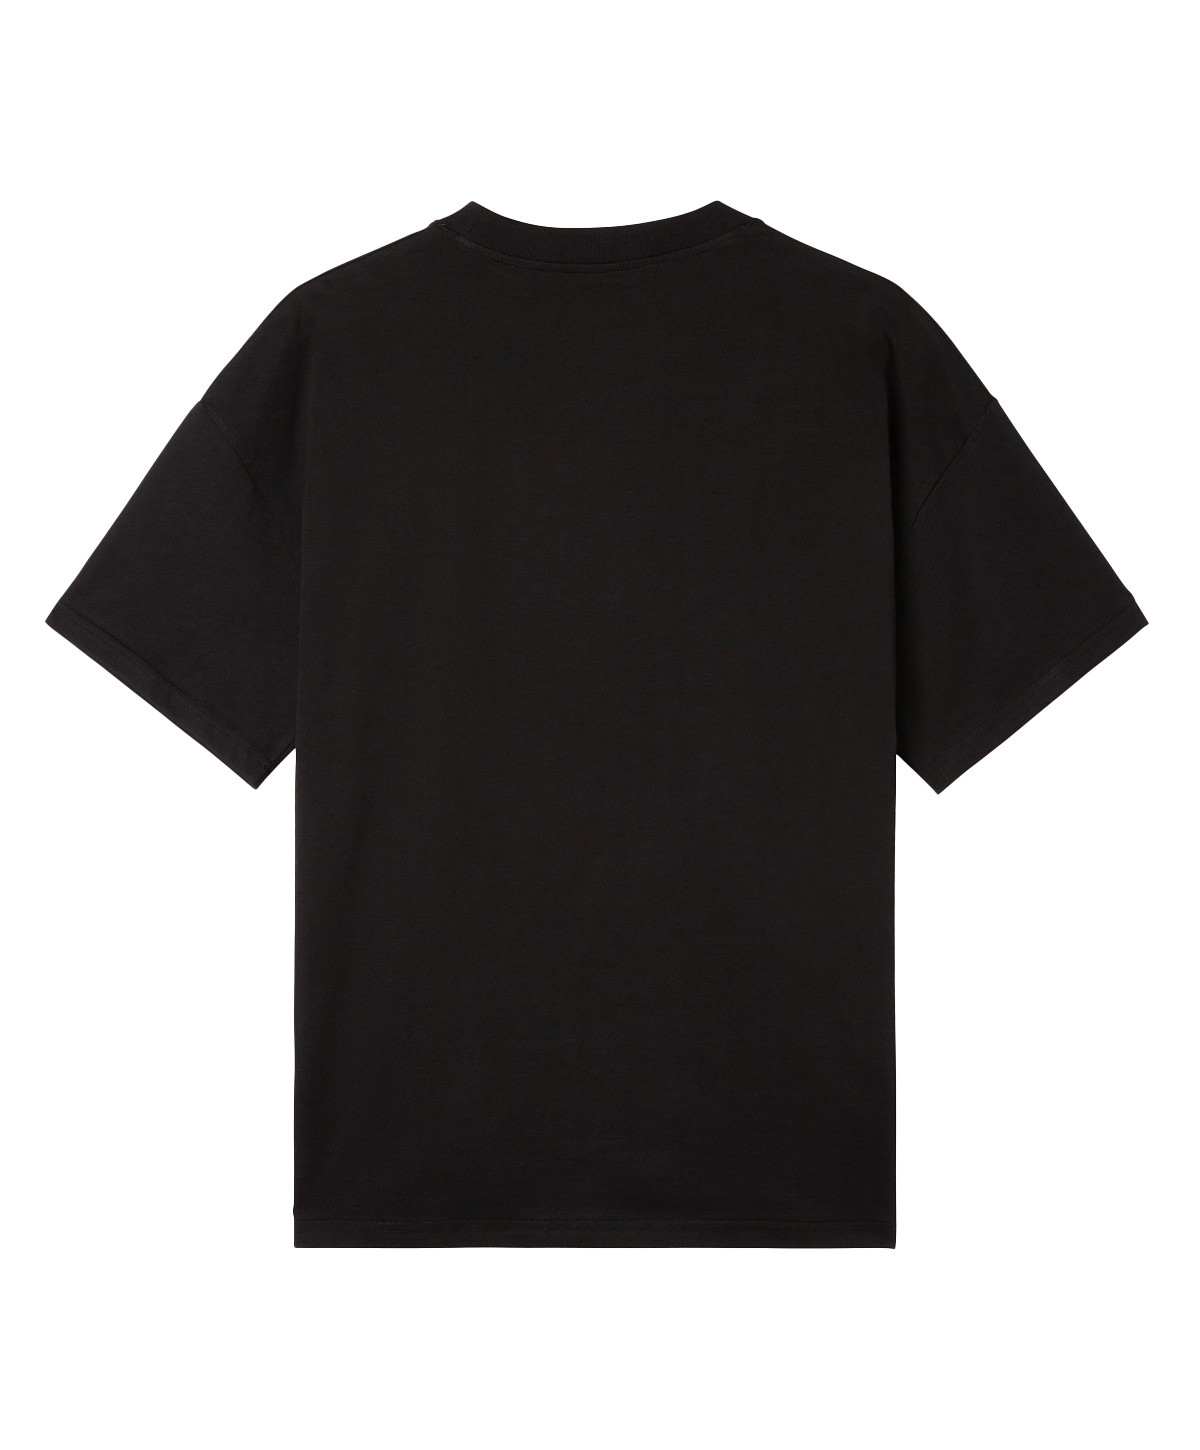 Funky - Crew-neck T-shirt with oval logo, Black, large image number 1